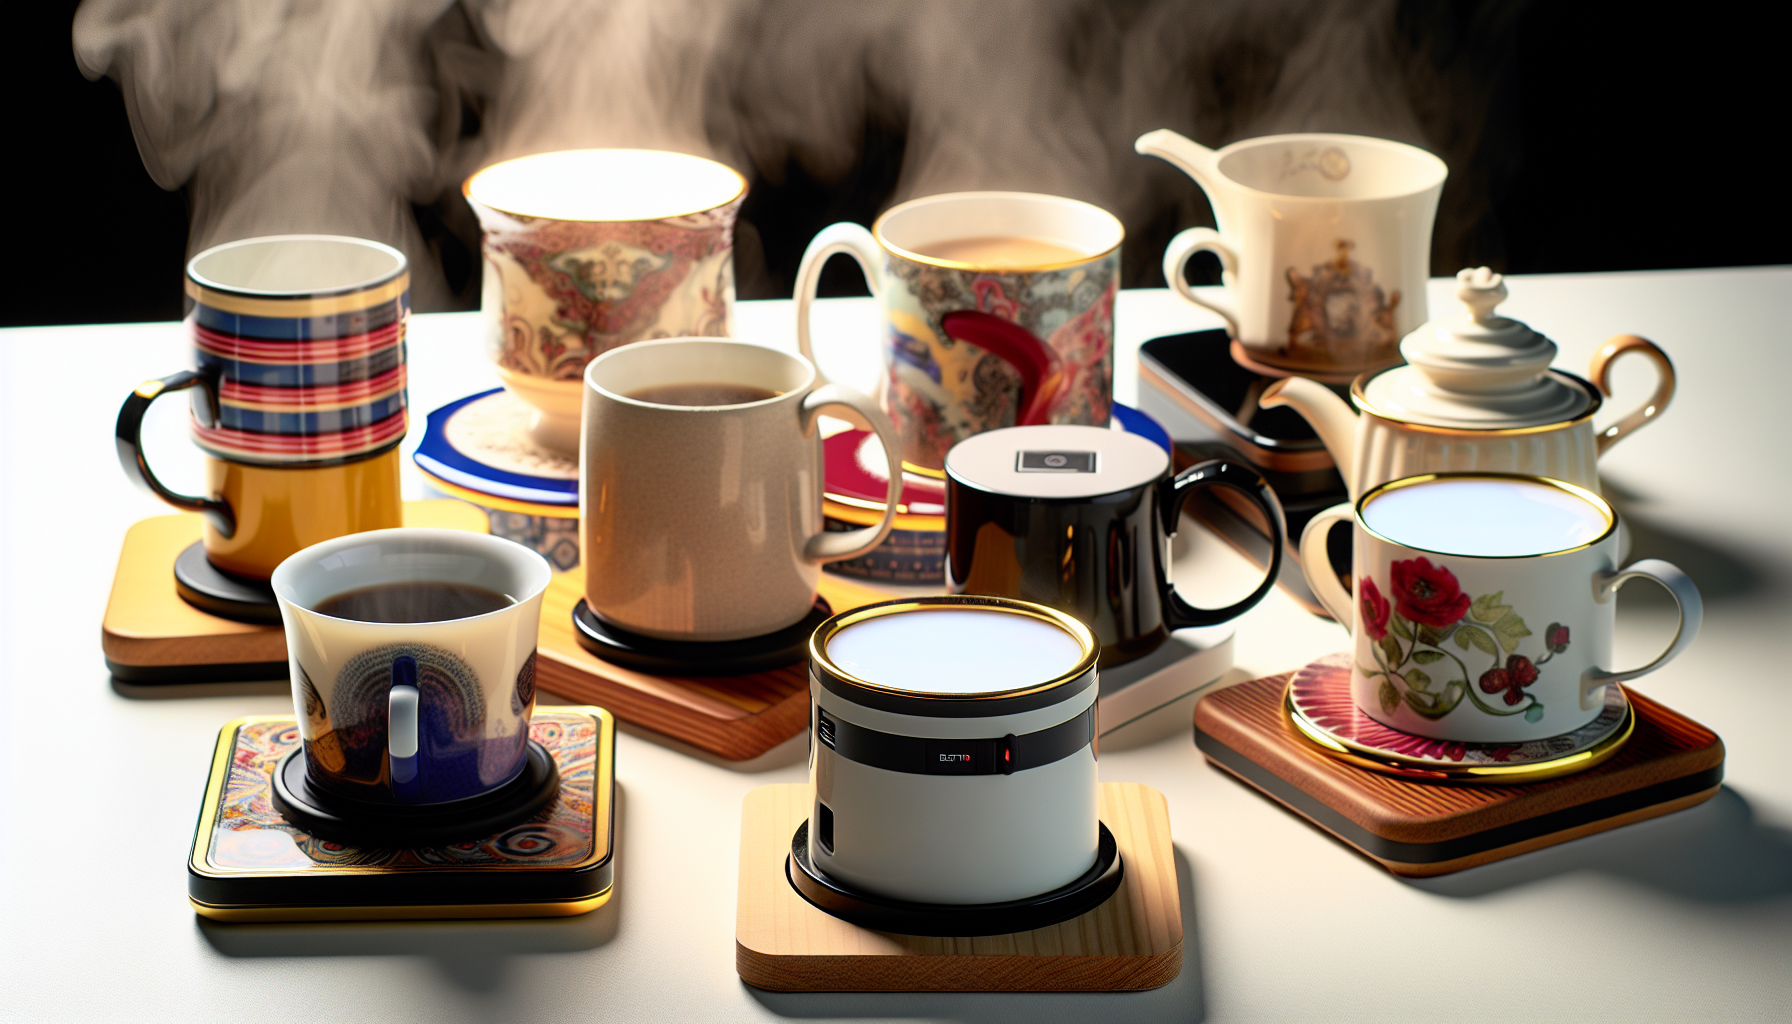 Various electric coasters with hot beverages